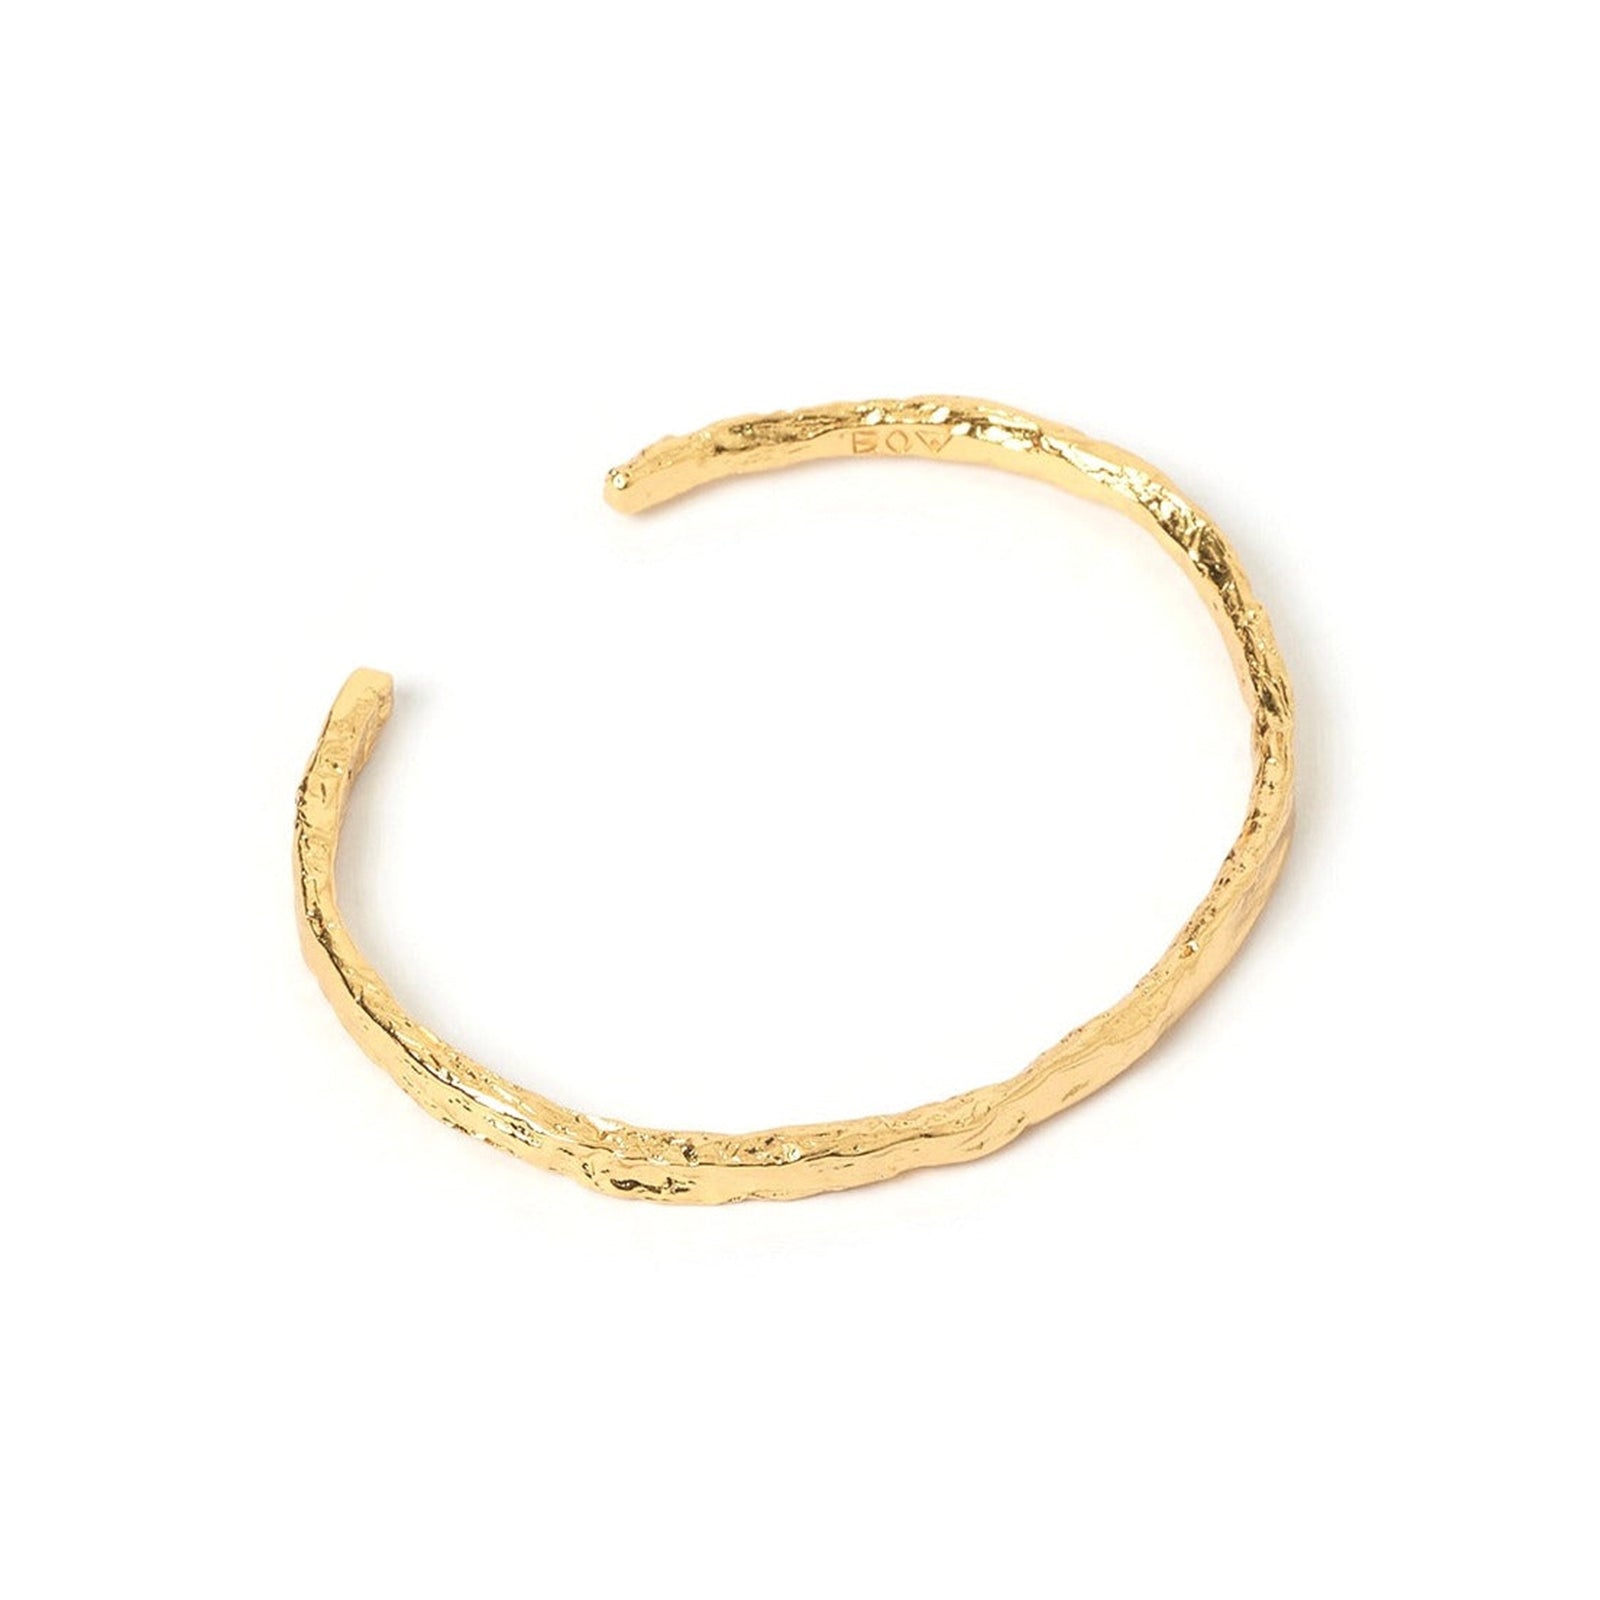 Arms Of Eve stunning Helios gold bracelet with a unique rough texture, perfect for adding a touch of elegance to any outfit